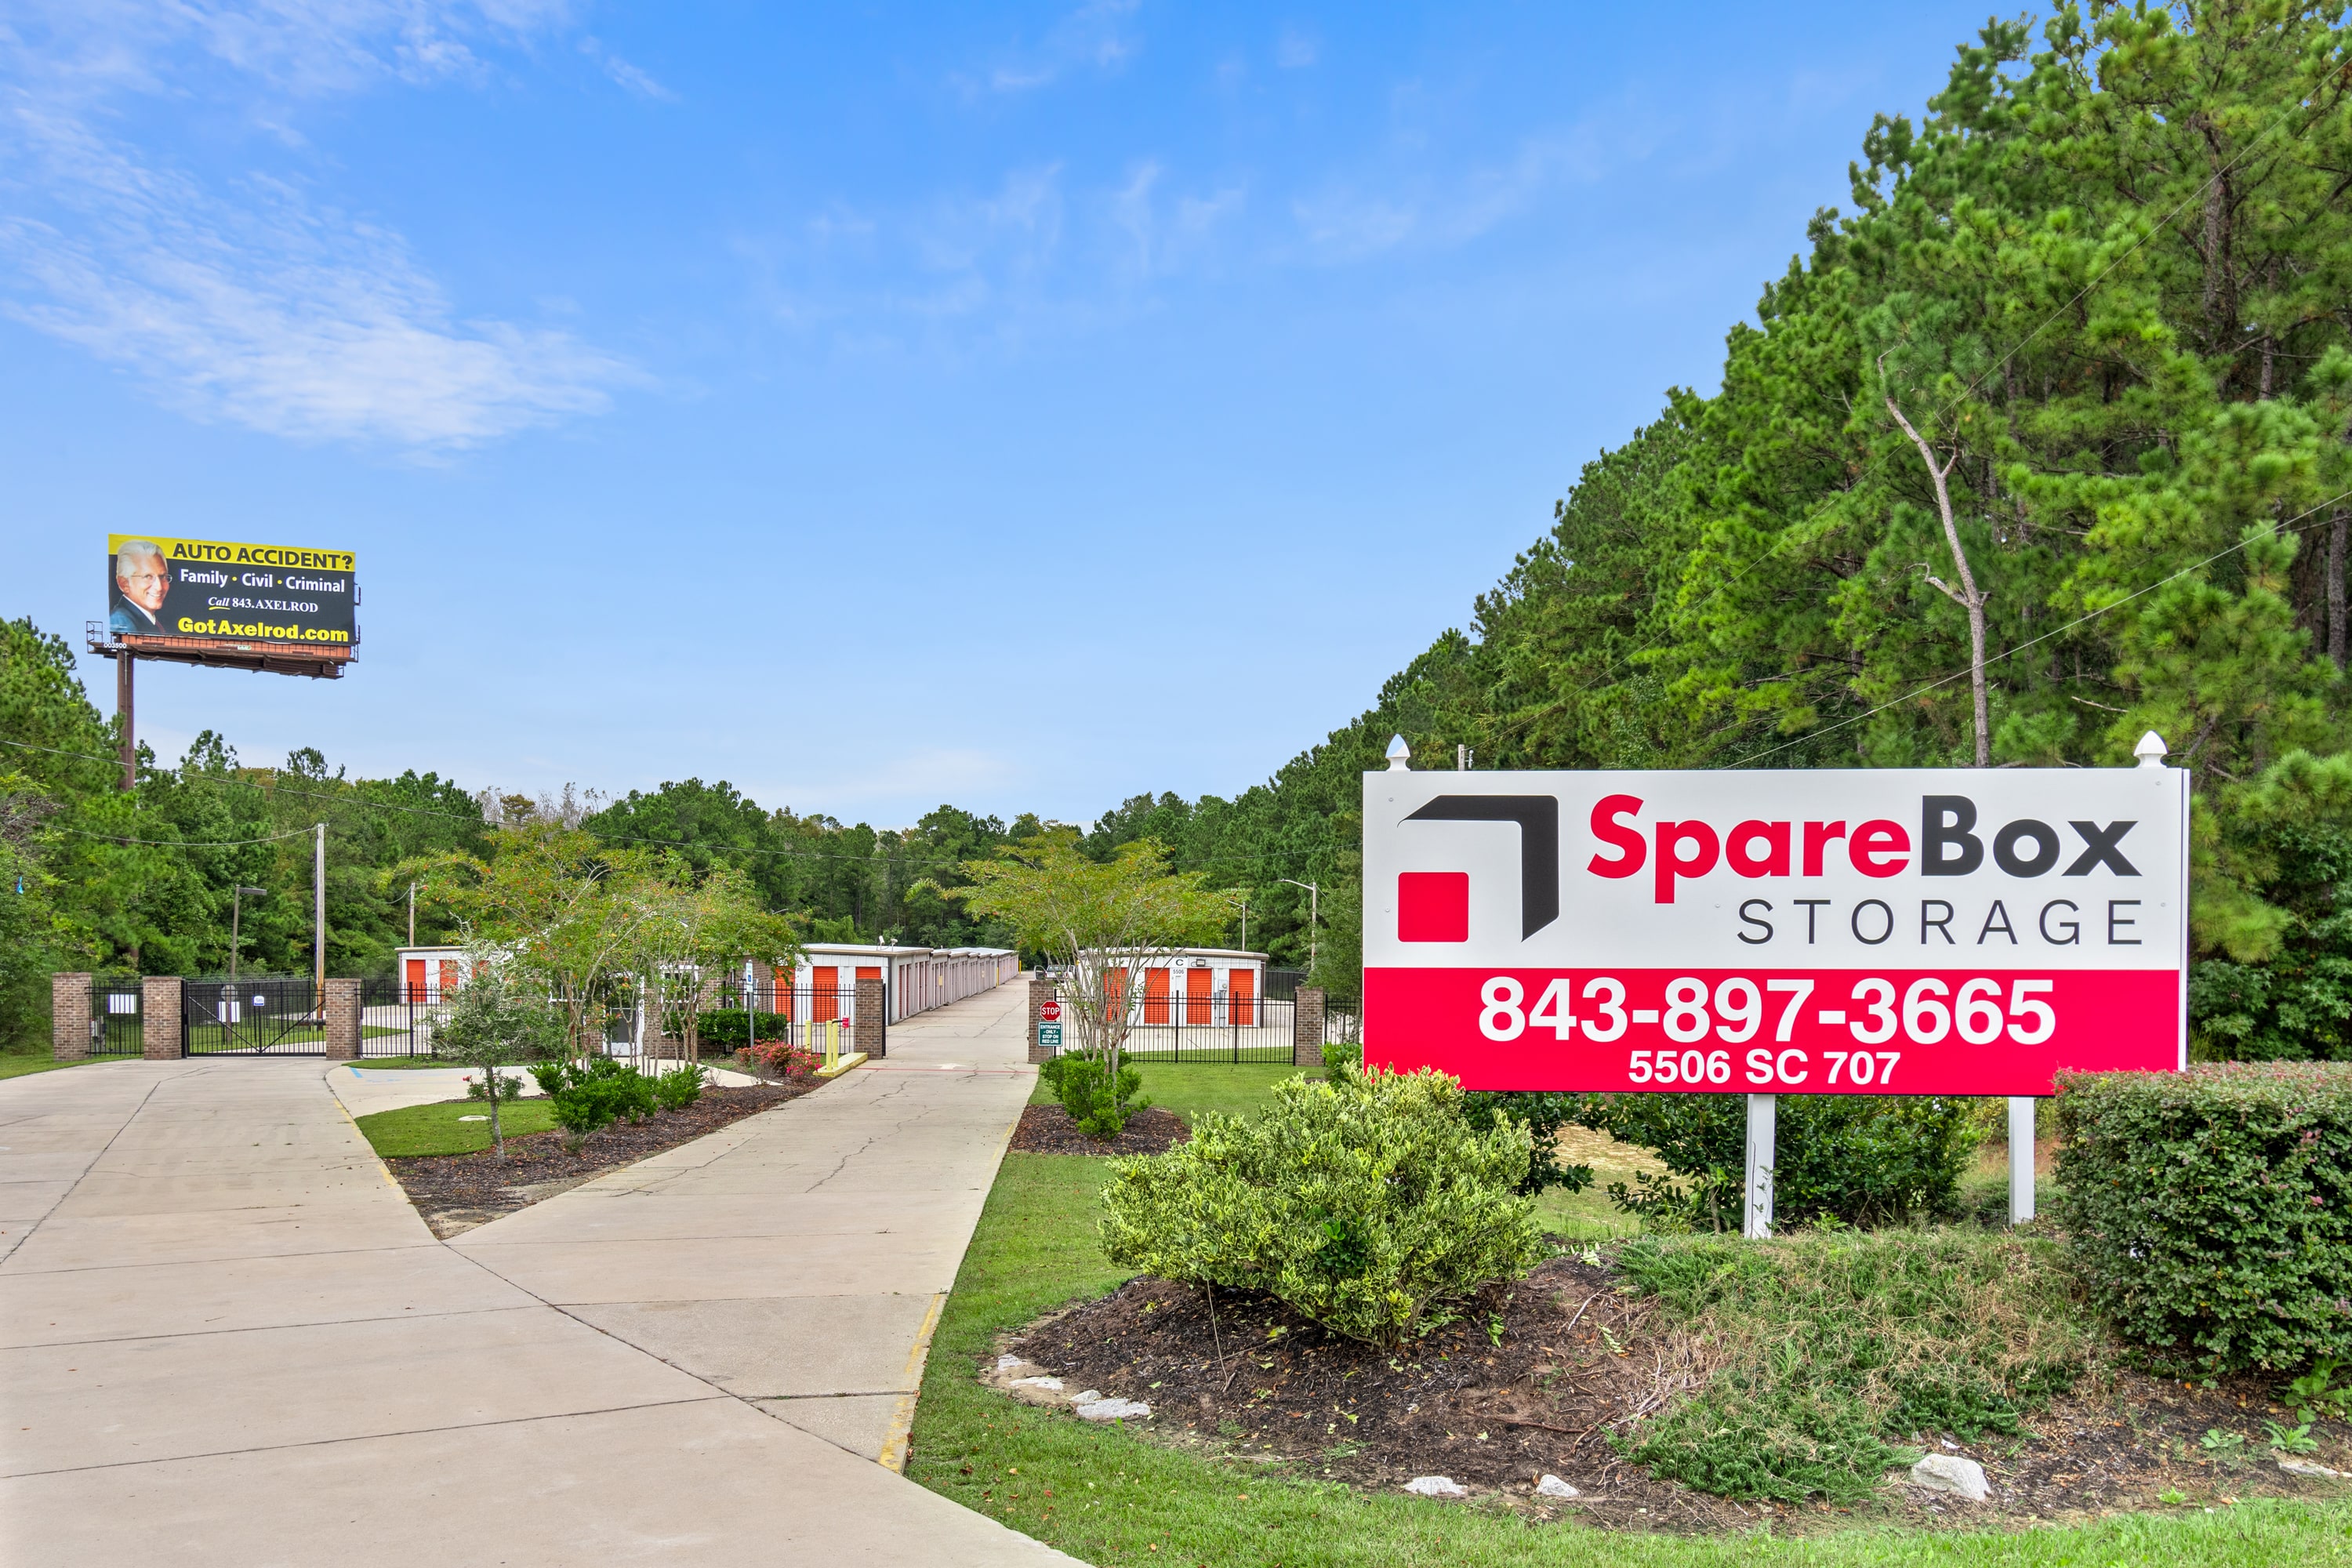 Meet all of your self storage needs in Myrtle Beach, SC at our South Carolina 707 location | SpareBox Storage